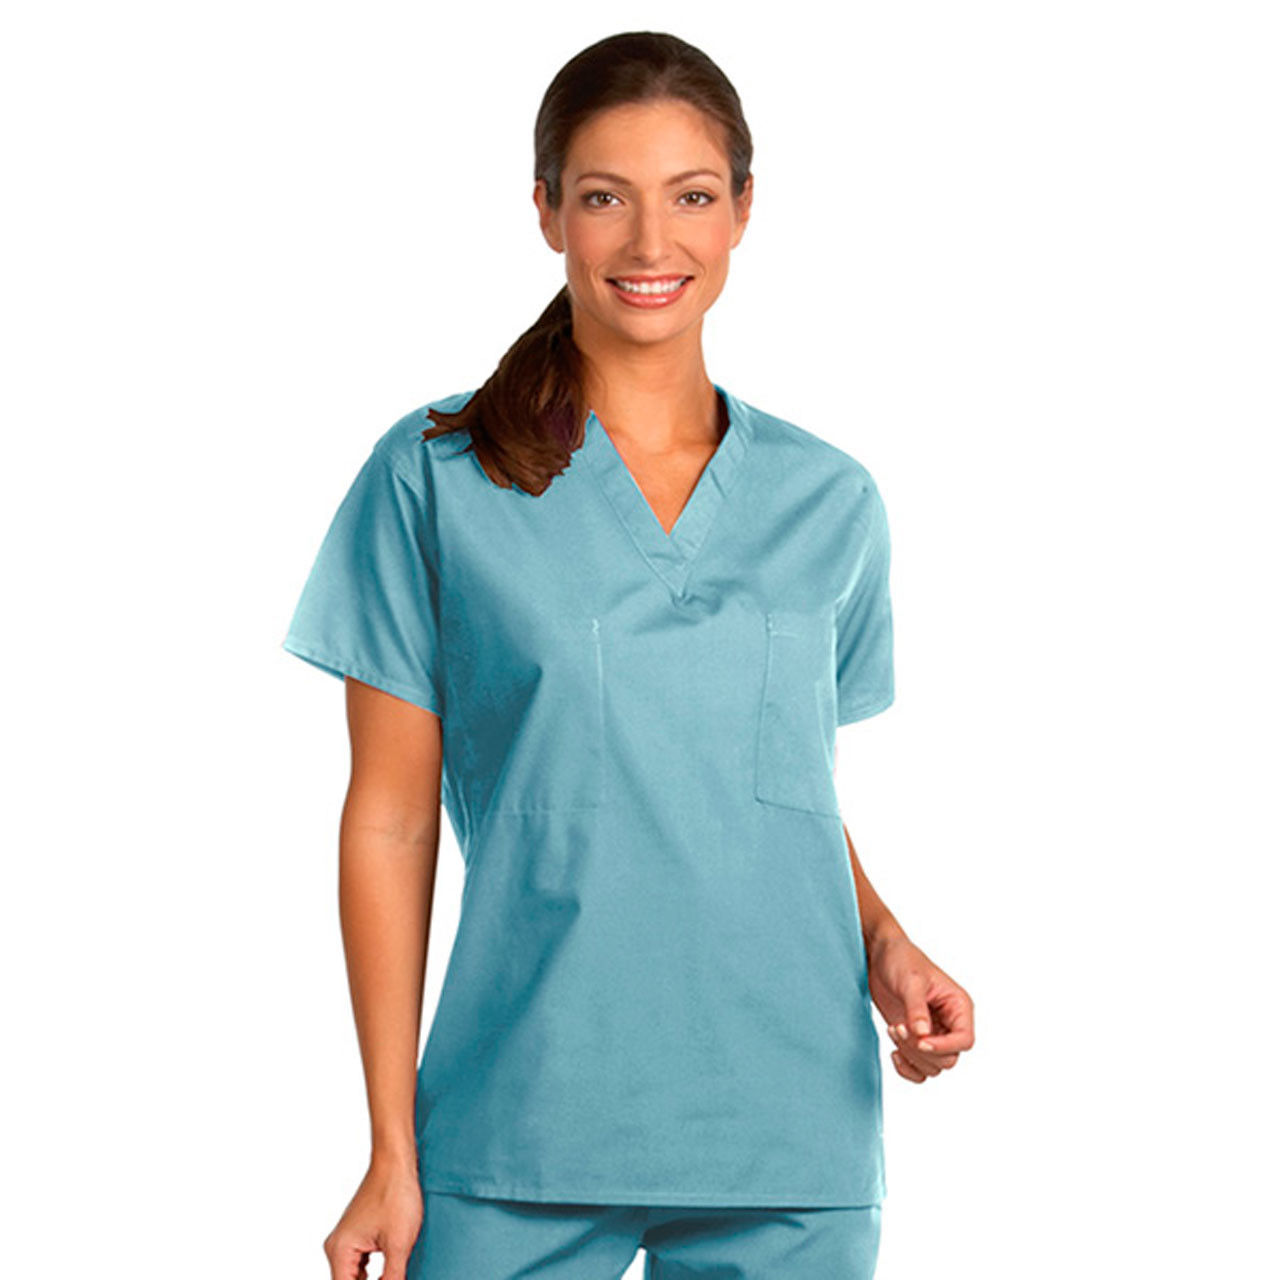 In what settings are these surgical scrubs, Misty Green Unisex Scrub Sets, appropriate for use?